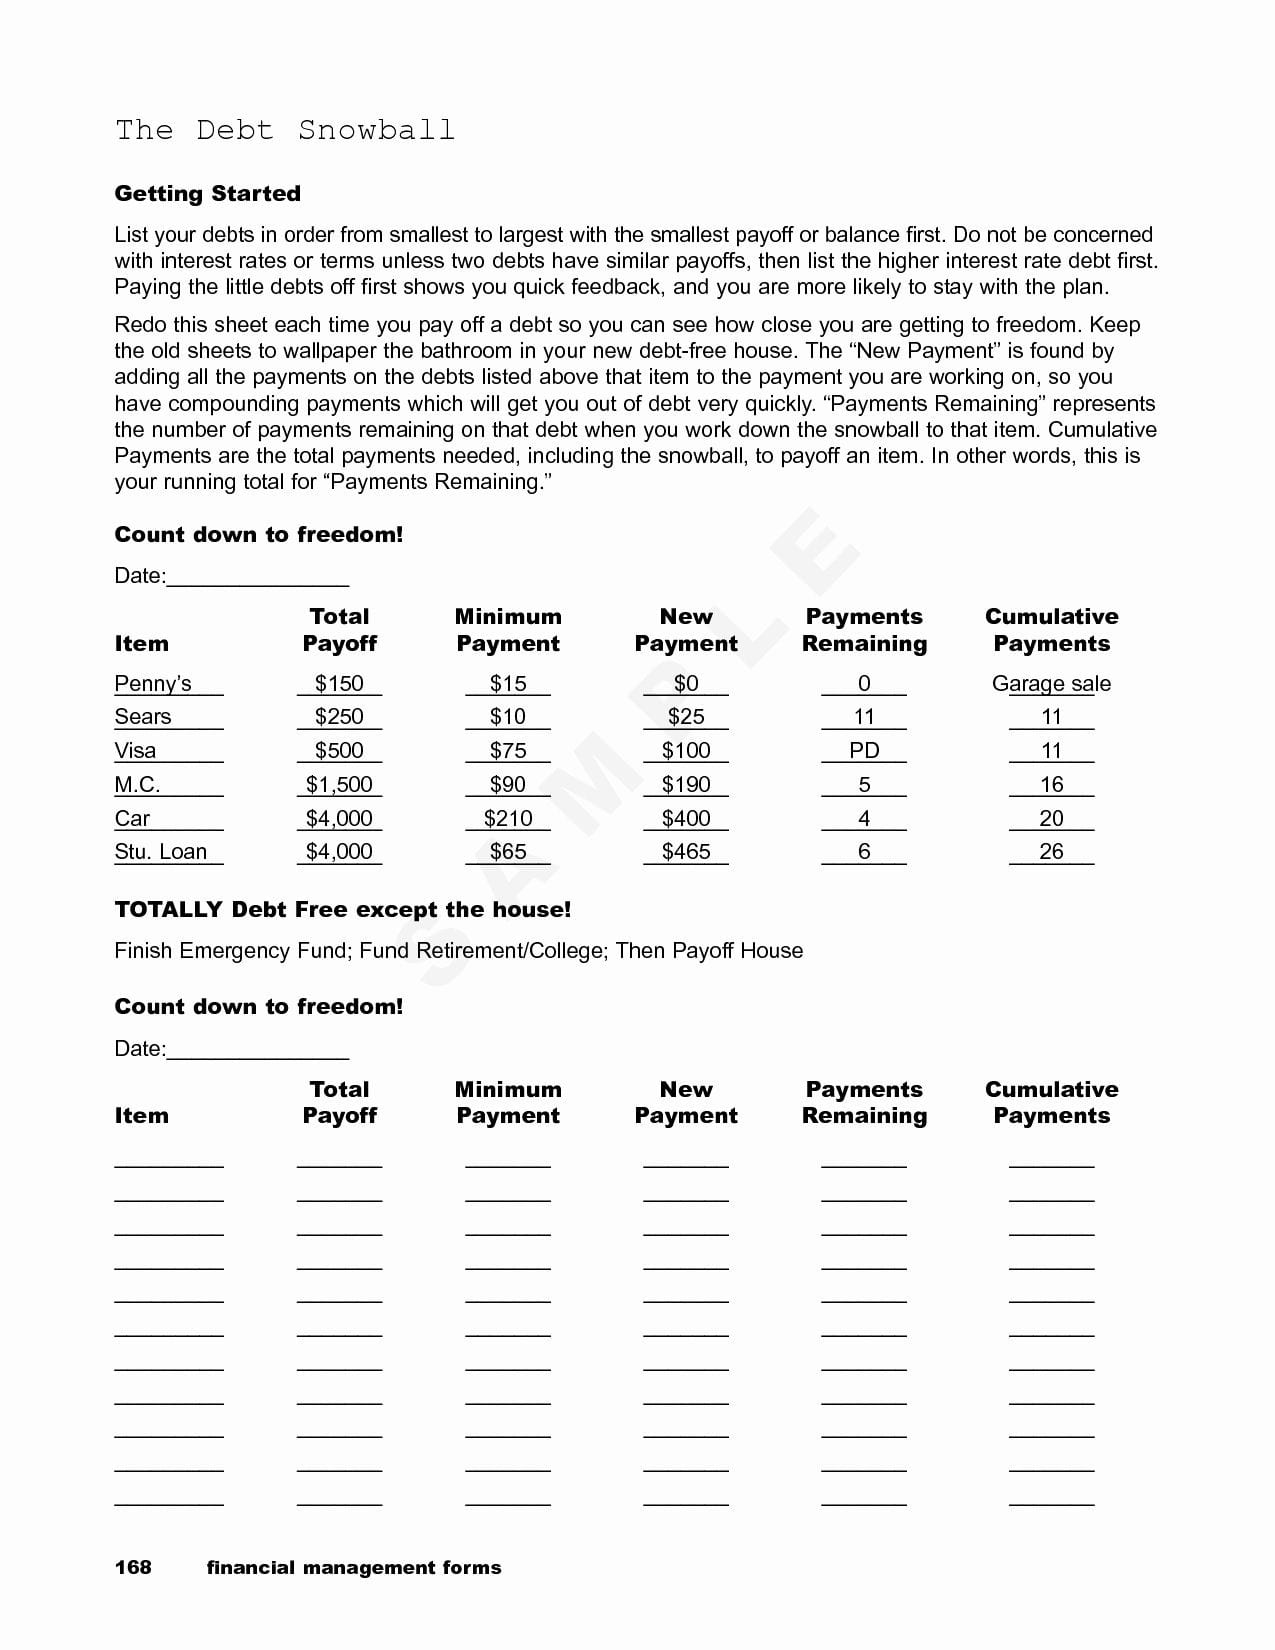 The Debt Snowball Worksheet Answers